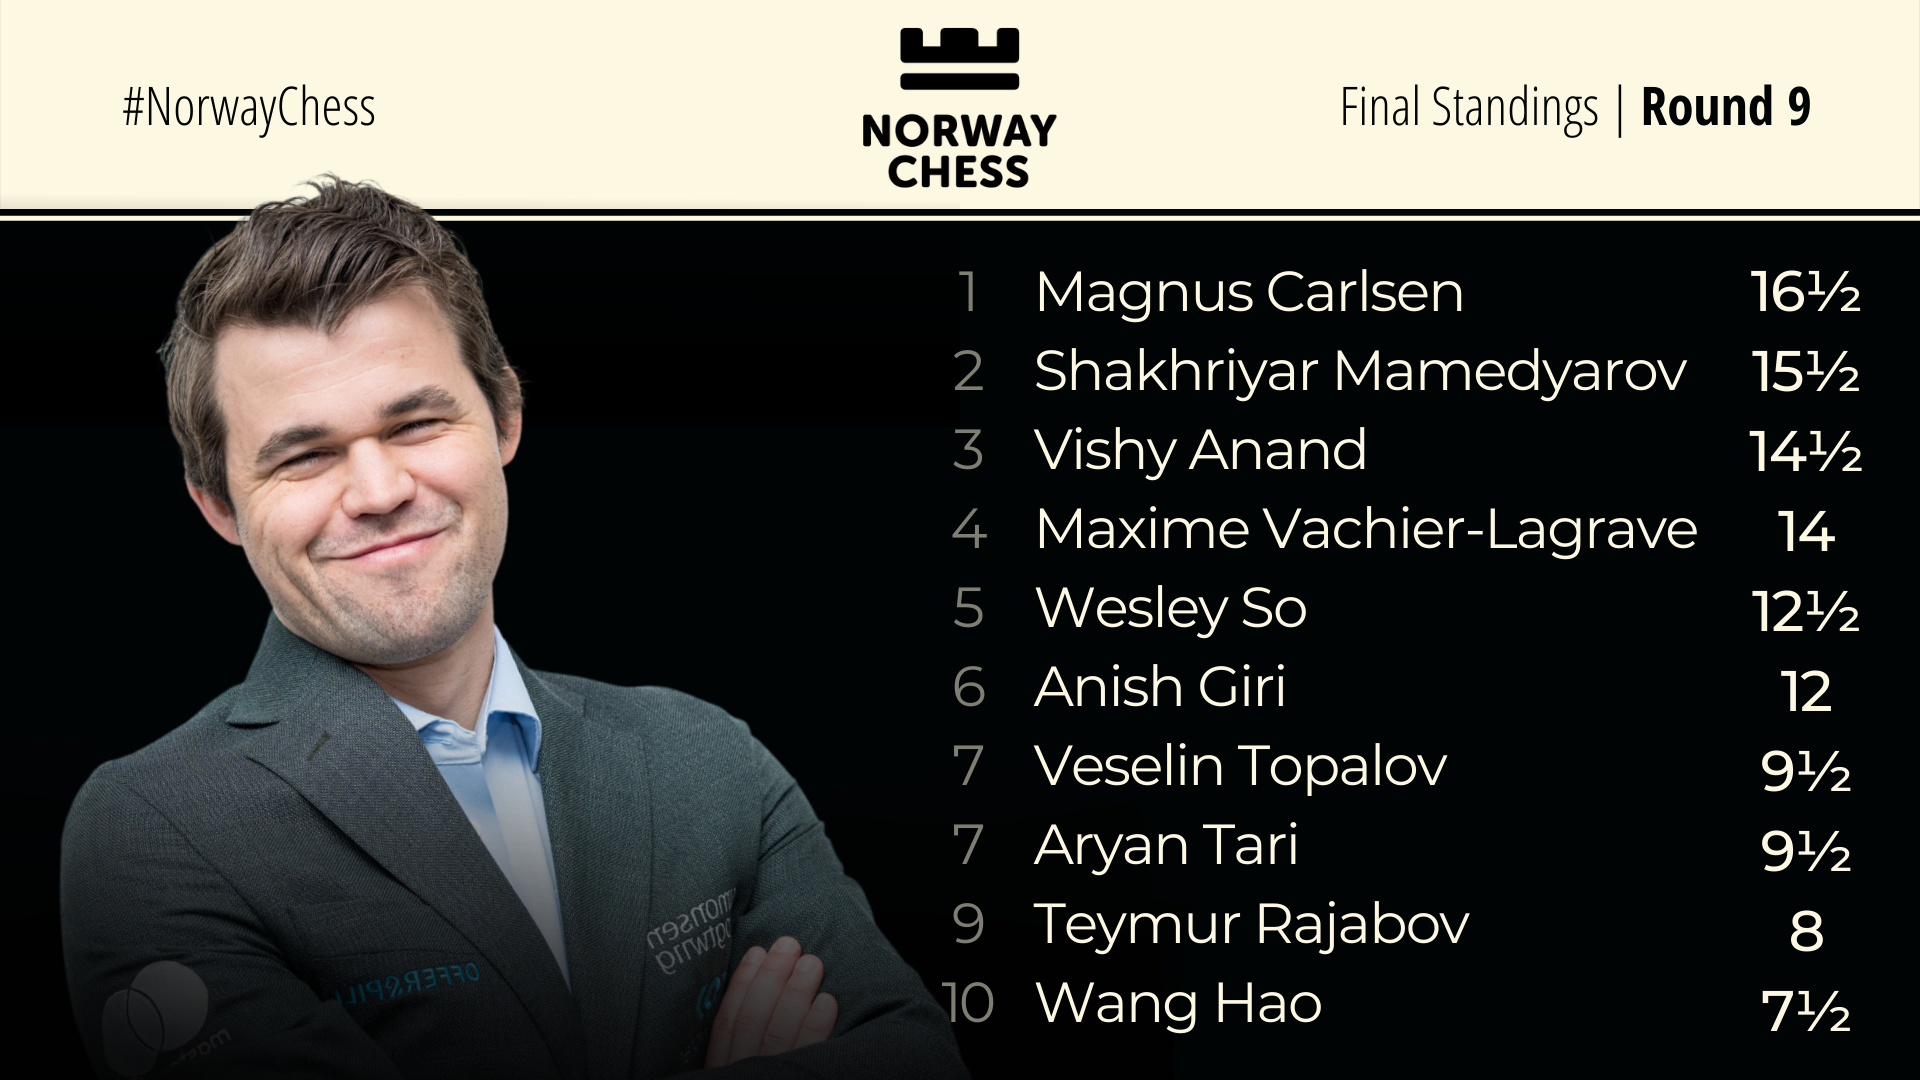 Norway Chess Final Standings